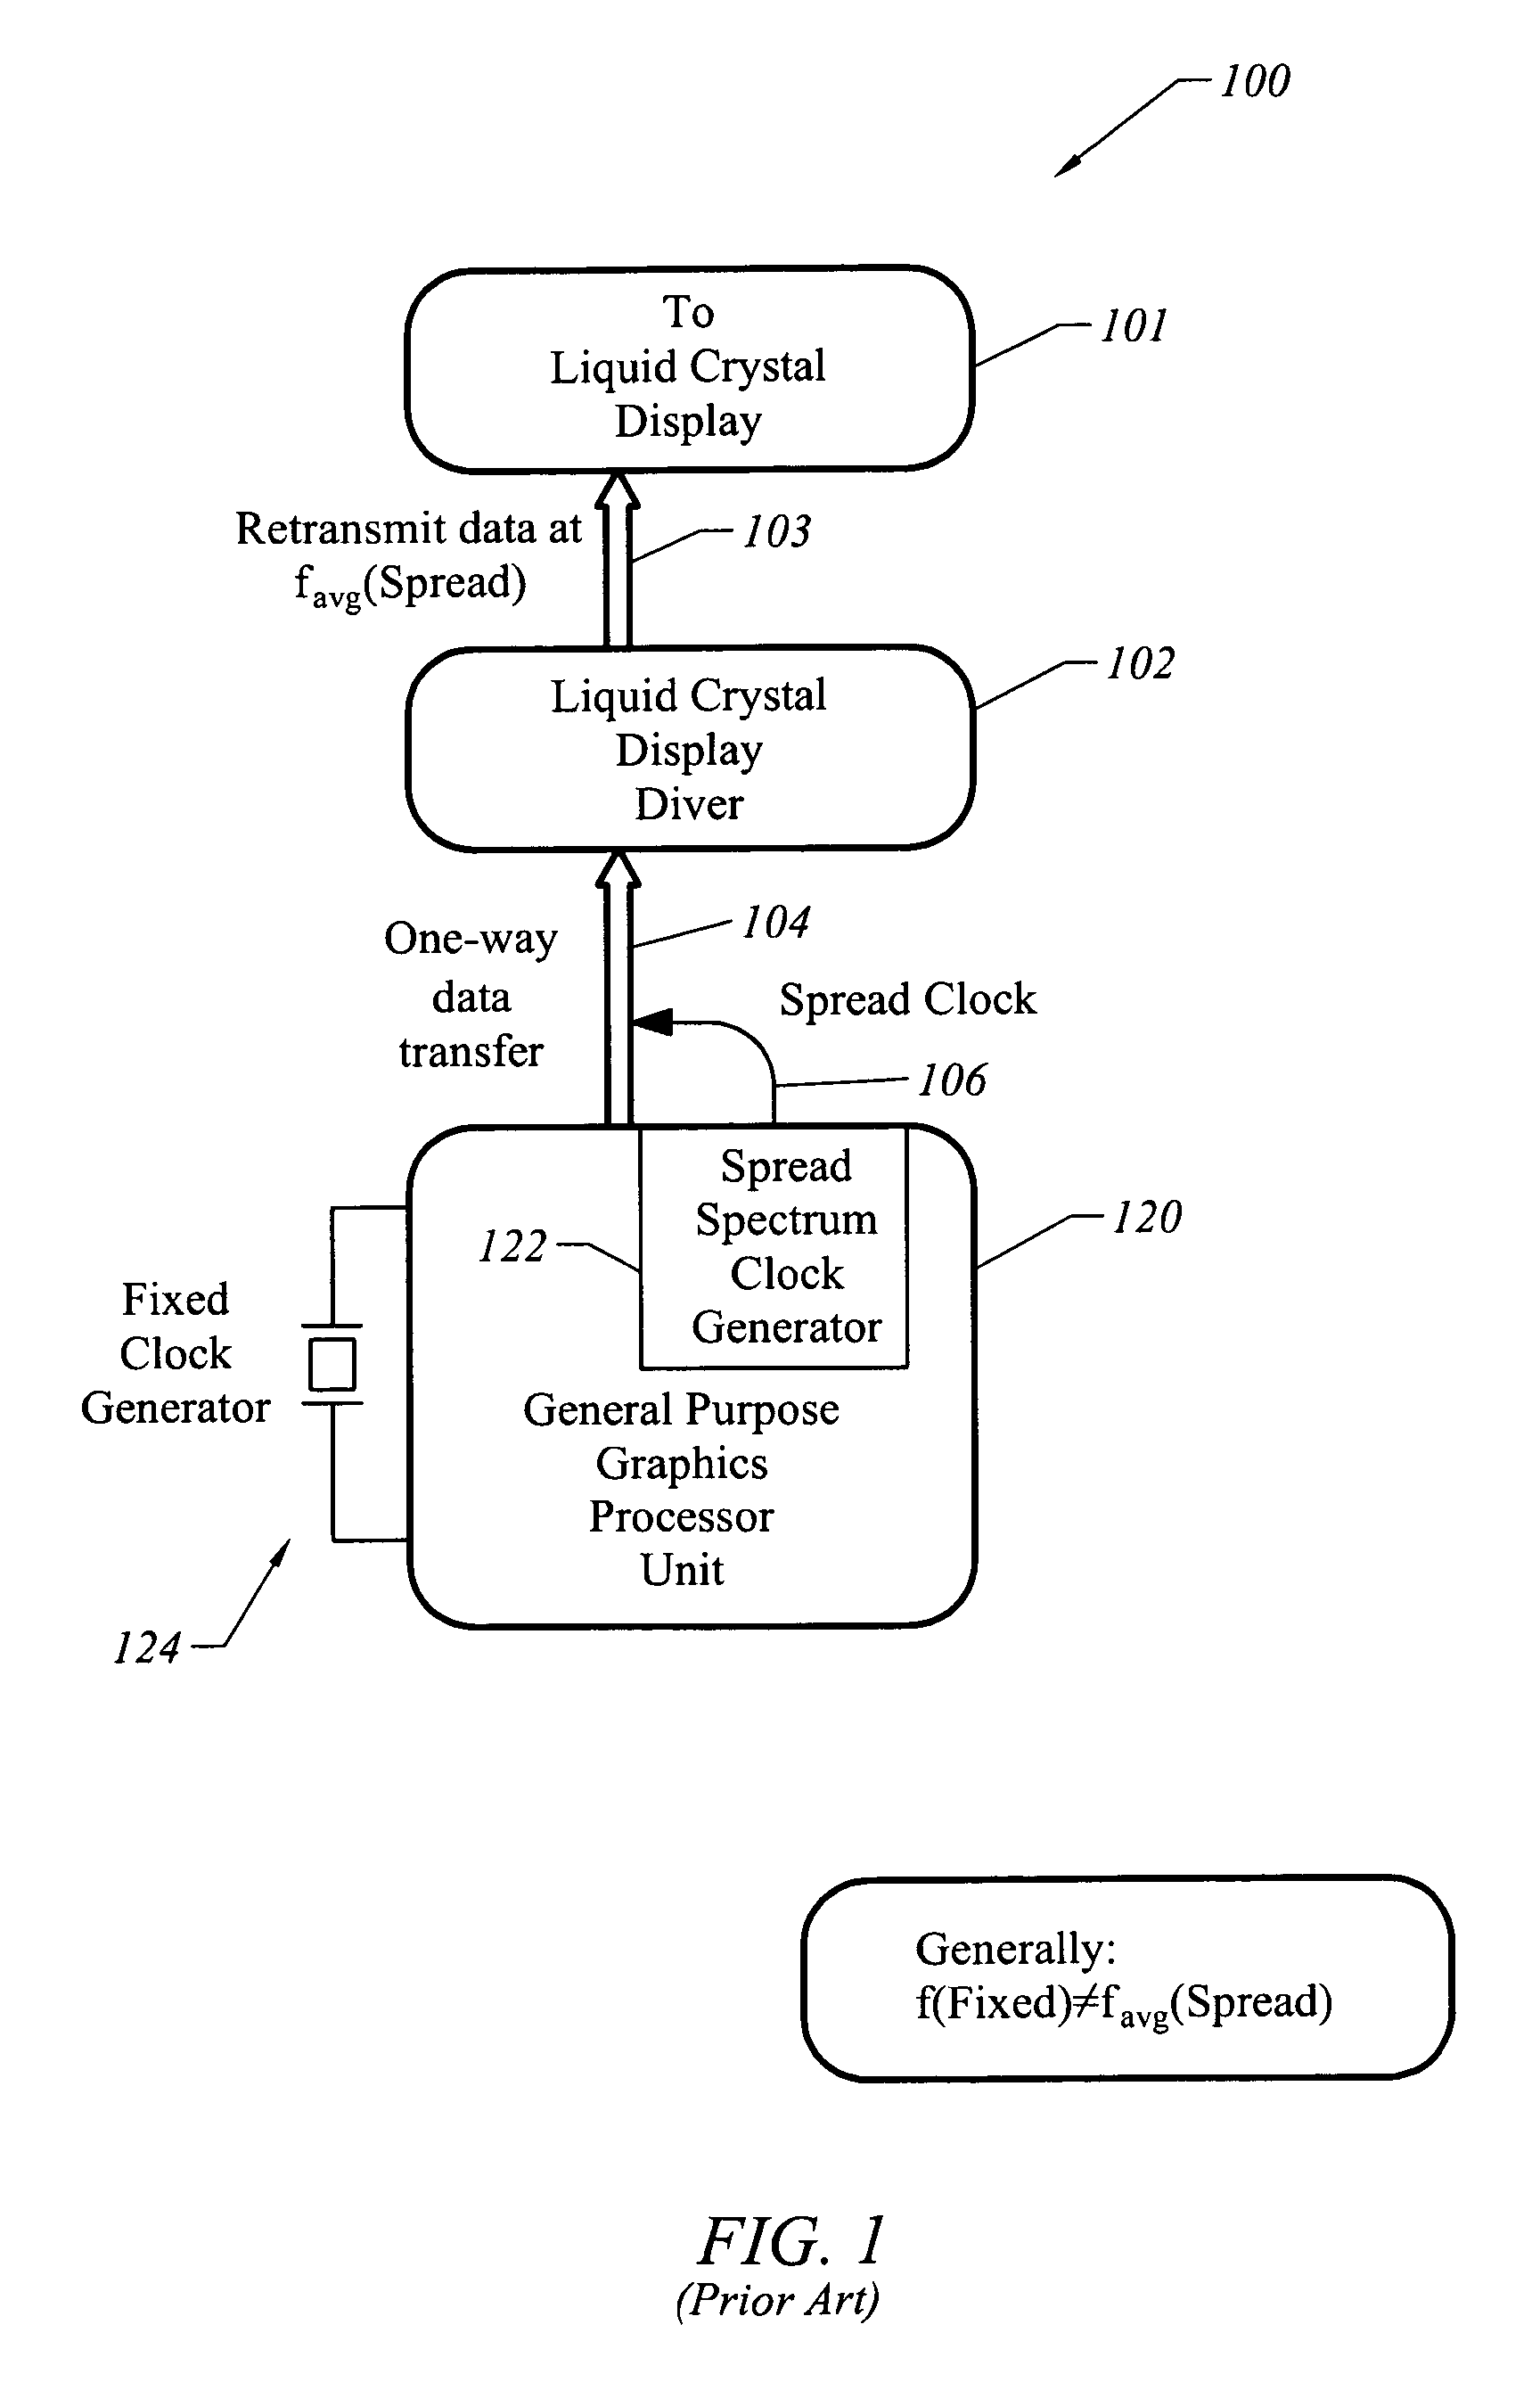 Variable frequency clock generator for synchronizing data rates between clock domains in radio frequency wireless communication systems